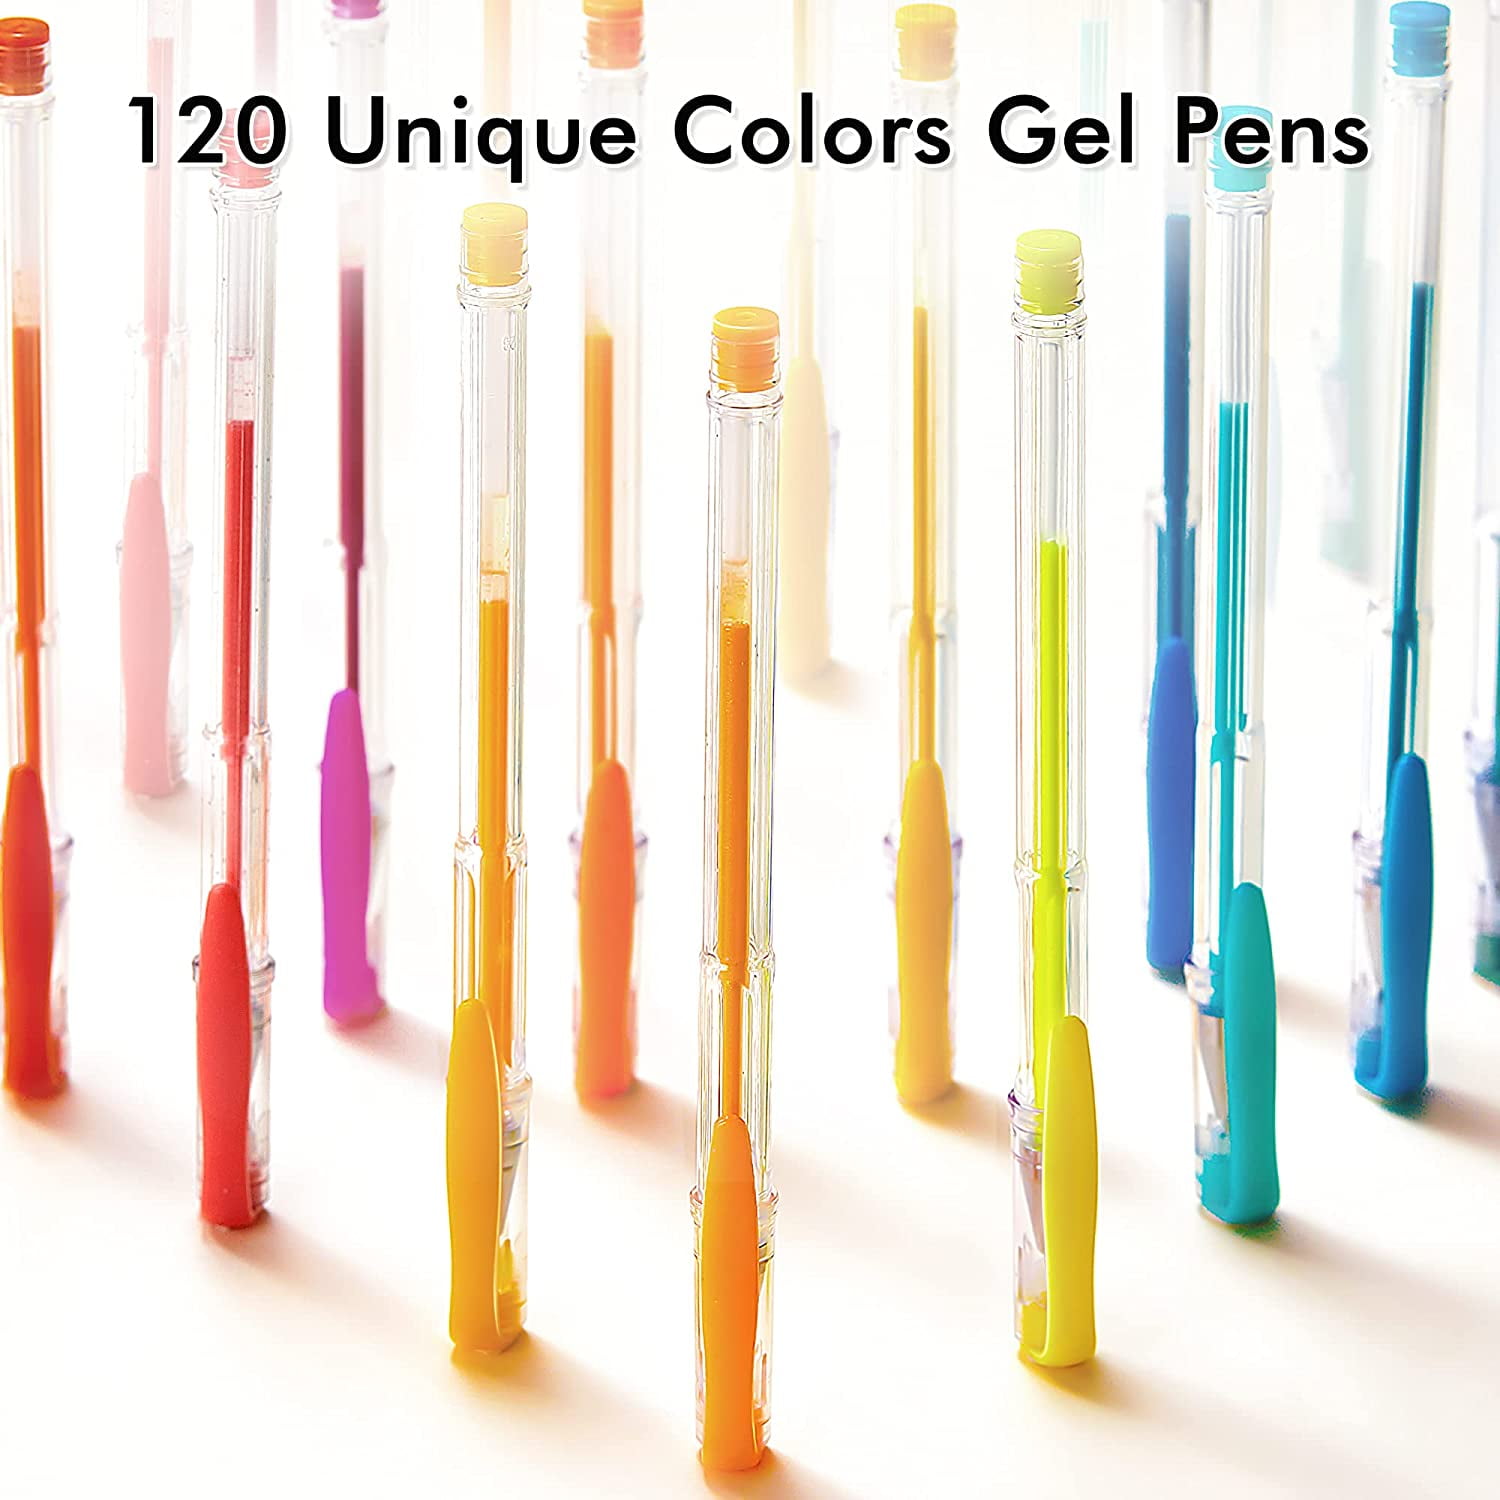 Swatch Form: TANMIT Gel Pens 120pc. 